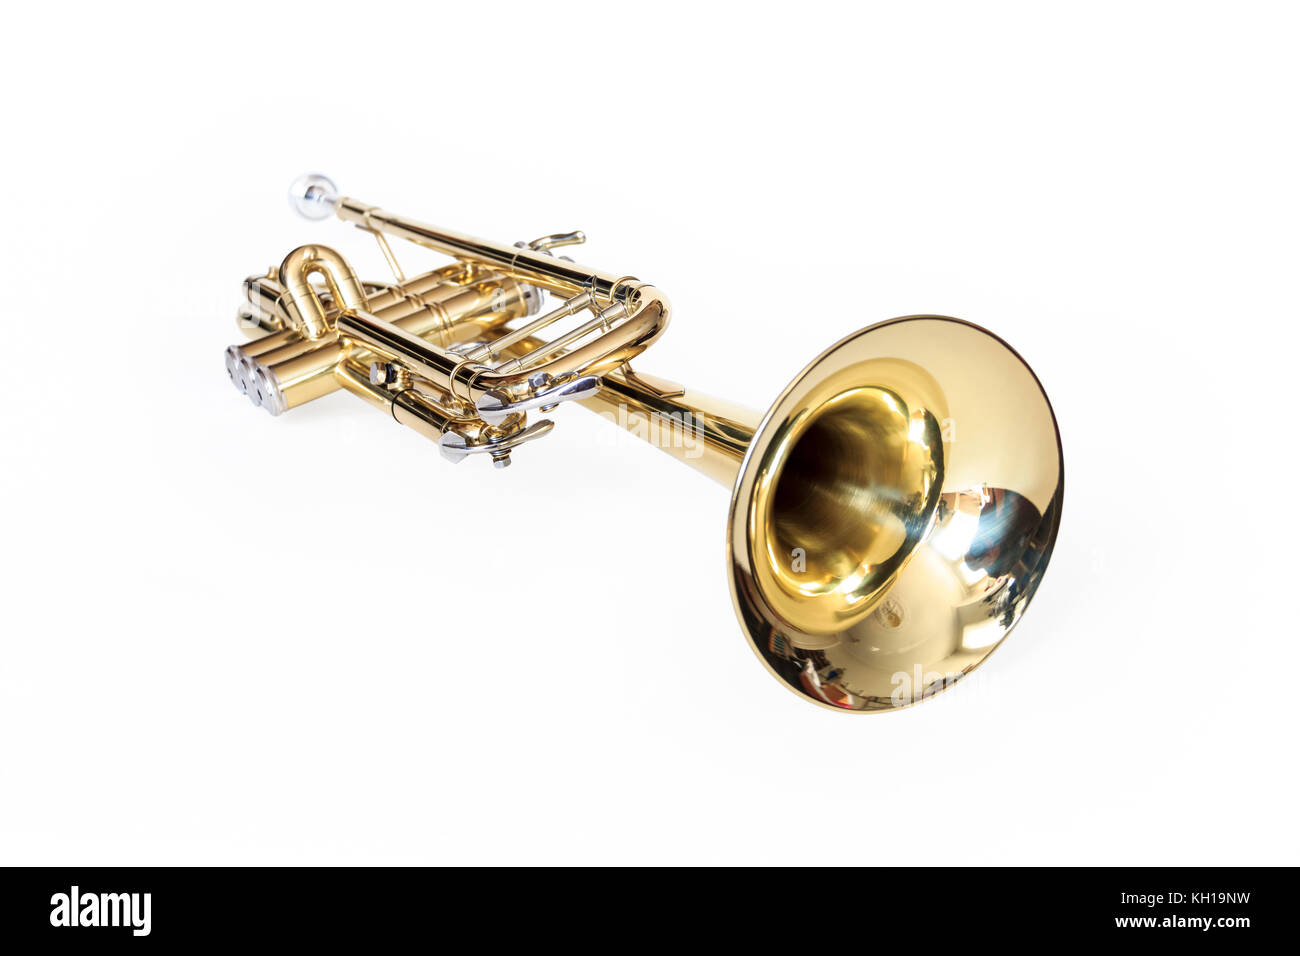 A gold lacquered Bb trumpet against a white background Stock Photo